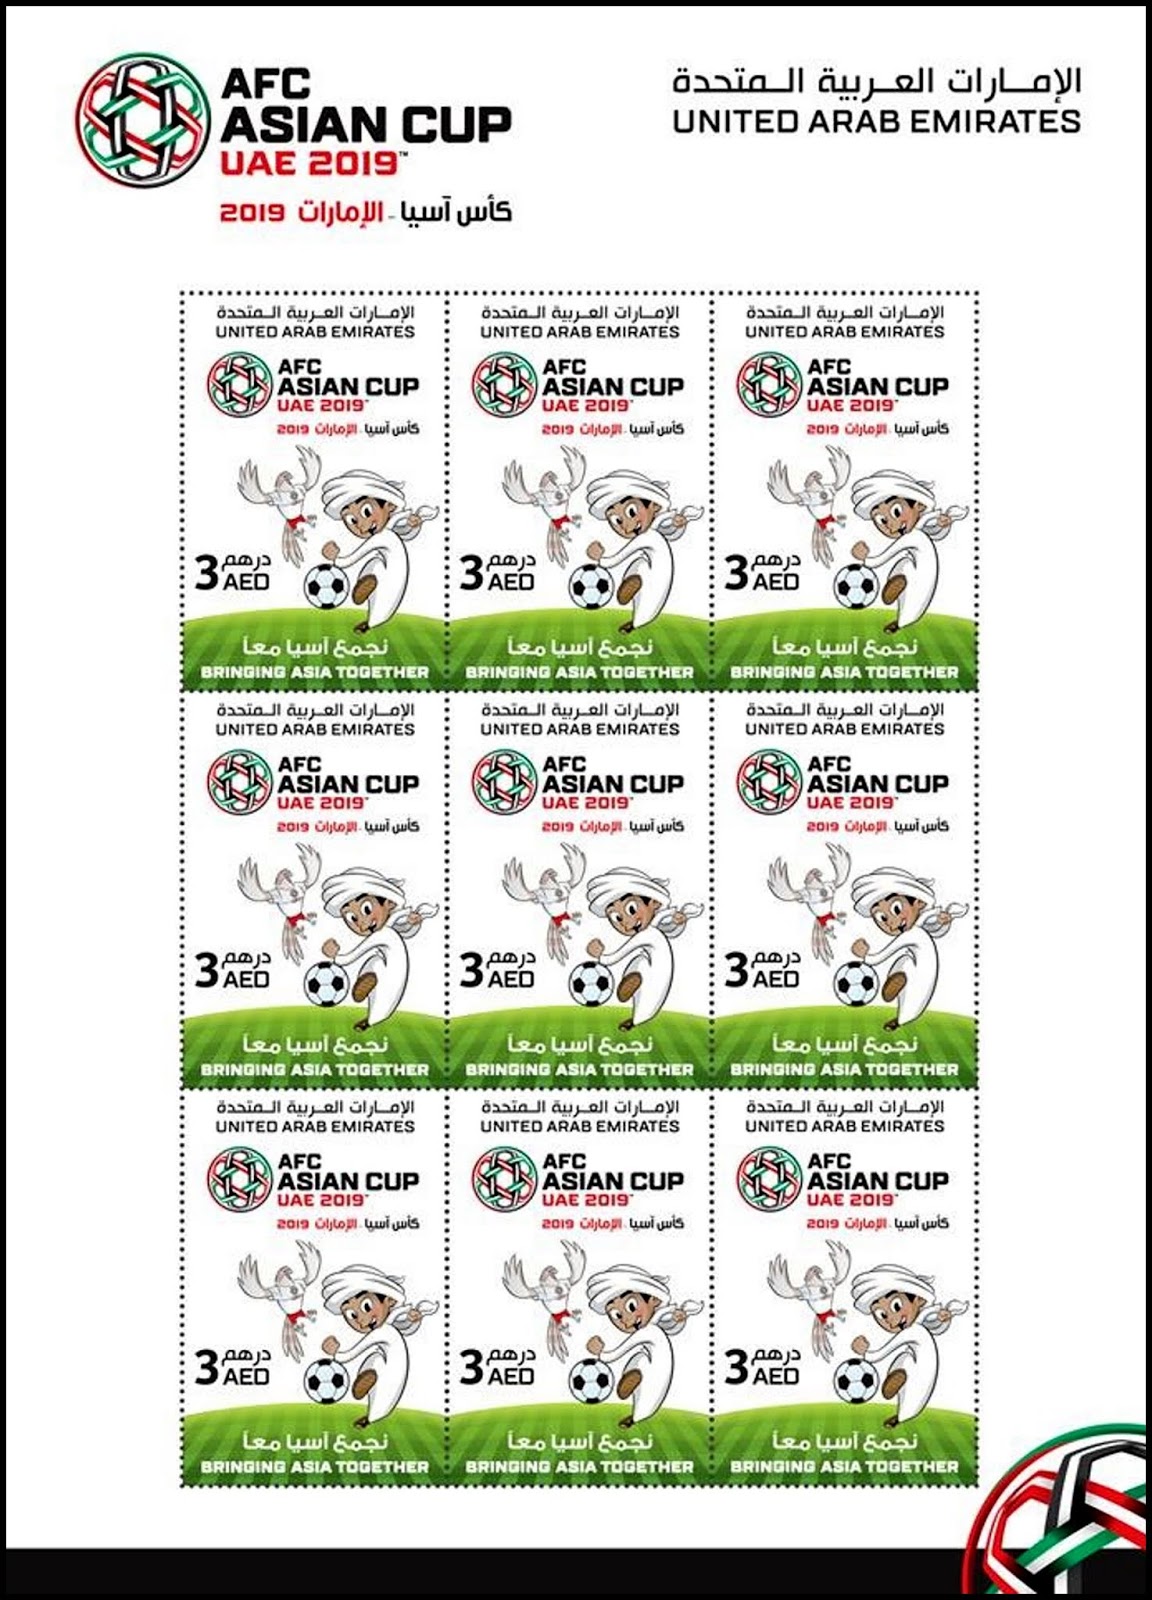 United Arab Emirates - AFC Asia Cup (January 5, 2019) pane of nine - image sourced from Gulfmann Stamps World blog